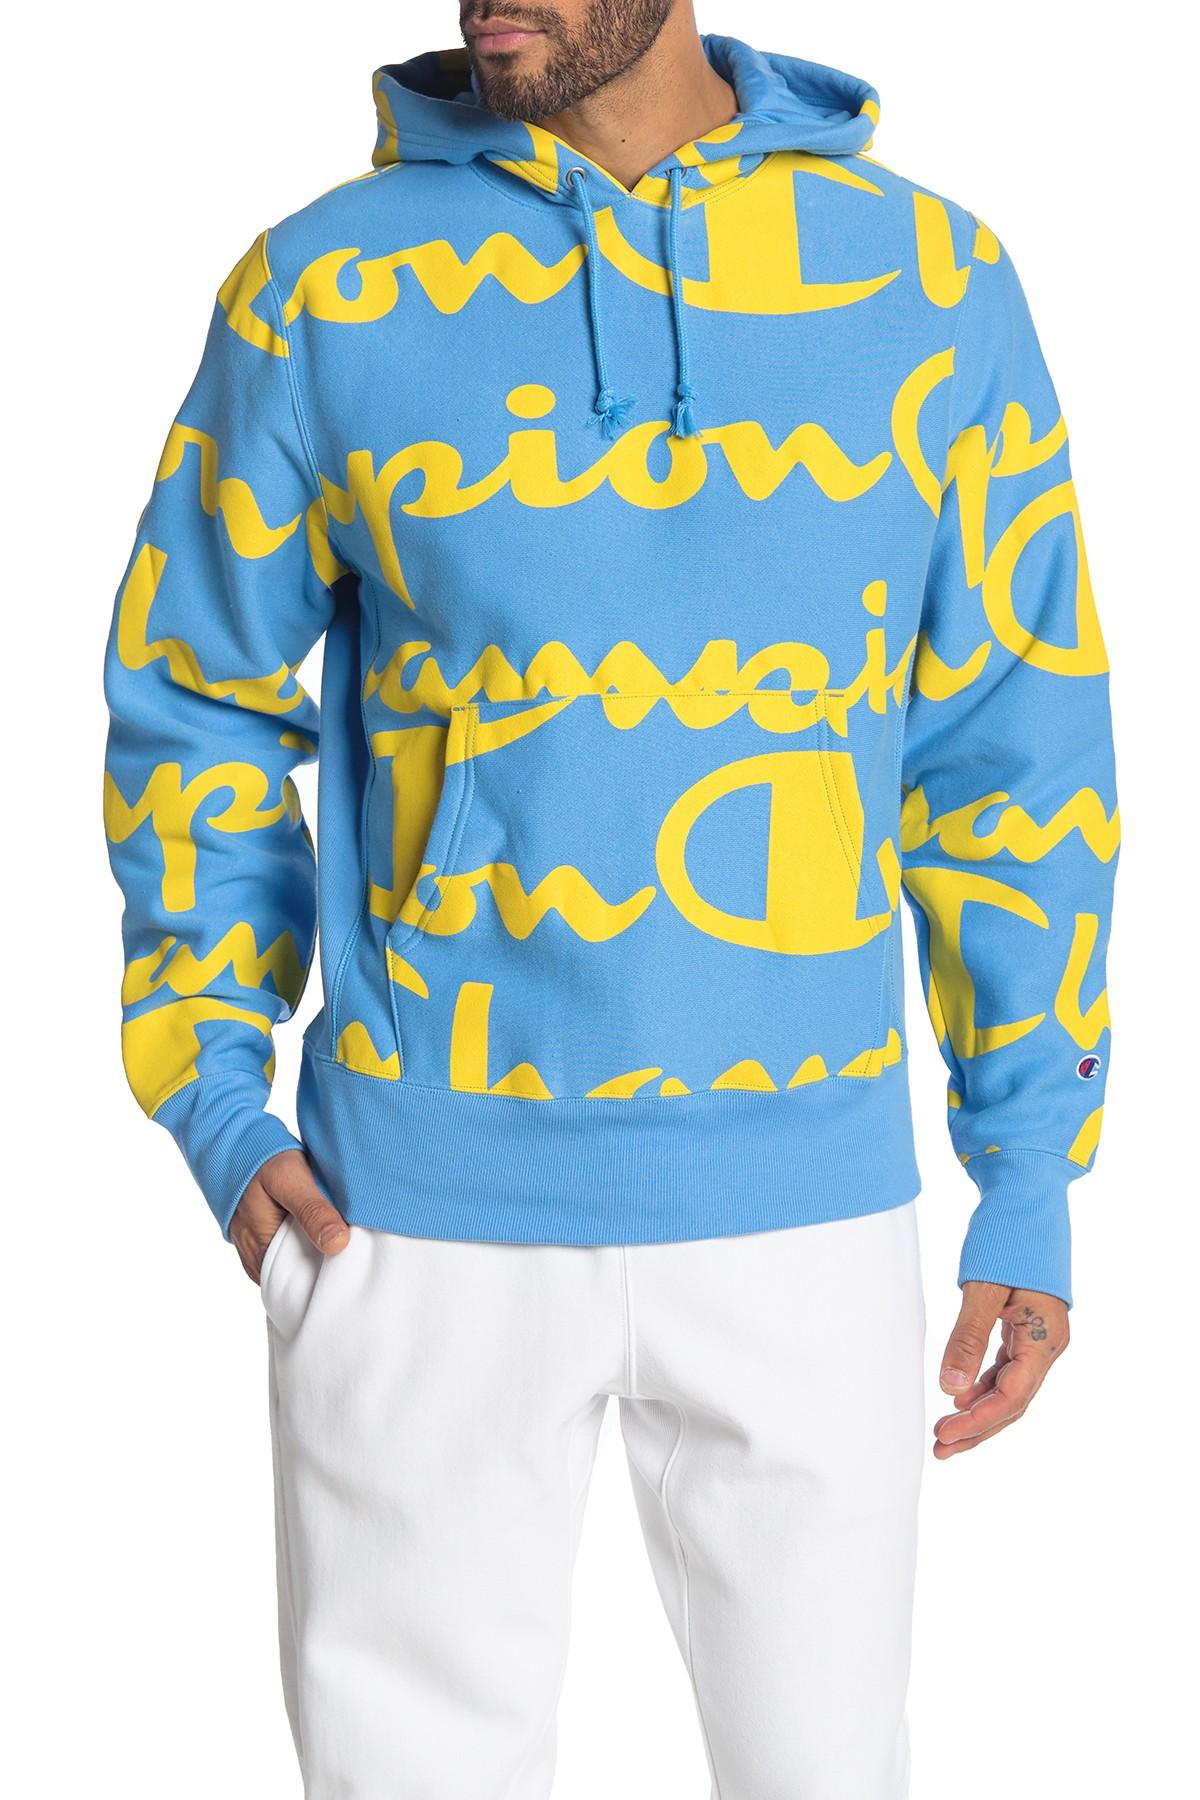 yellow and blue champion hoodie